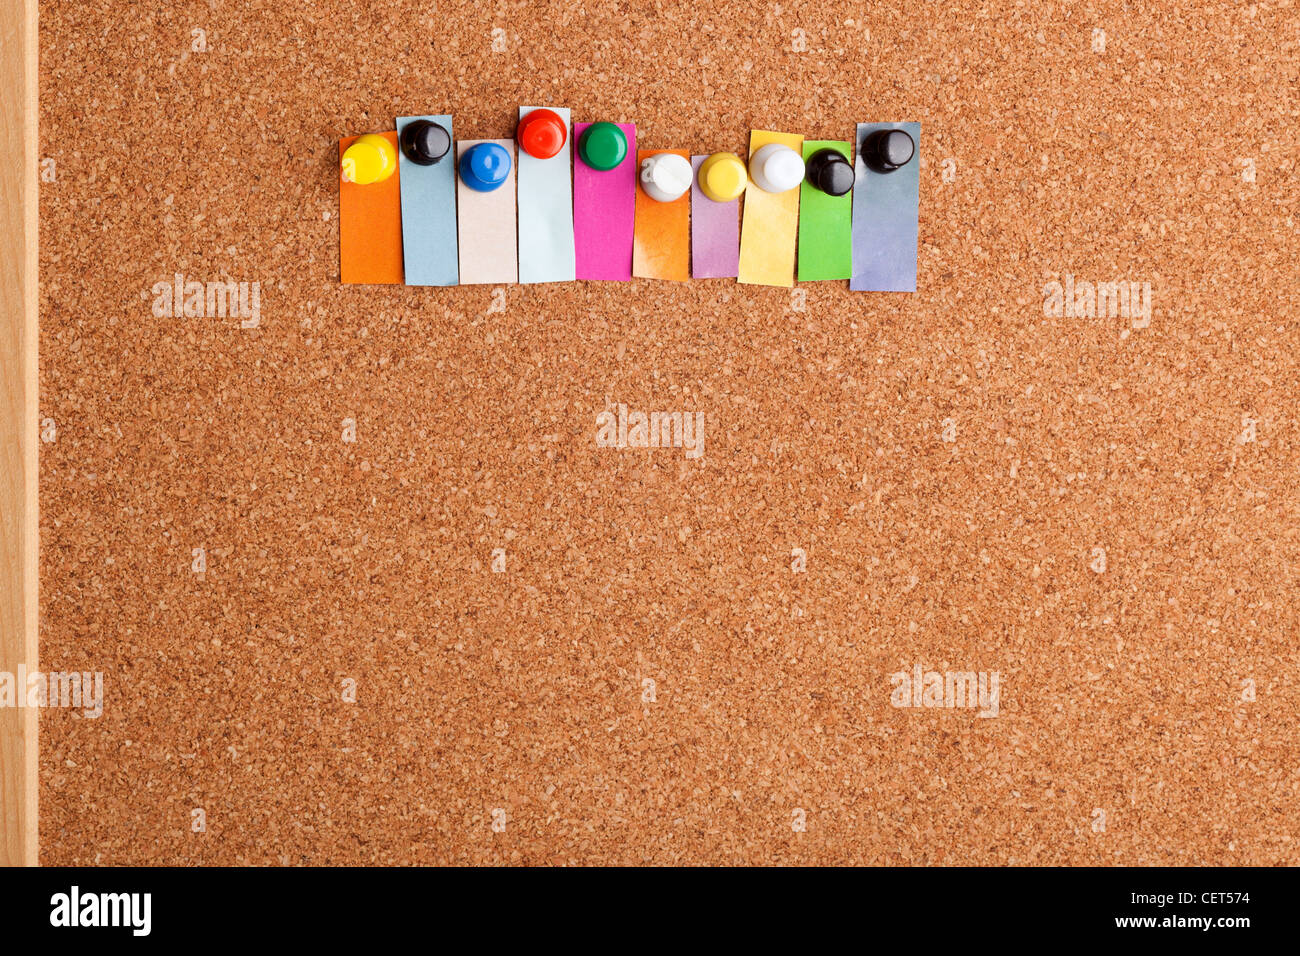 Cork board and colorful heading with copyspace for a ten letter word Stock Photo